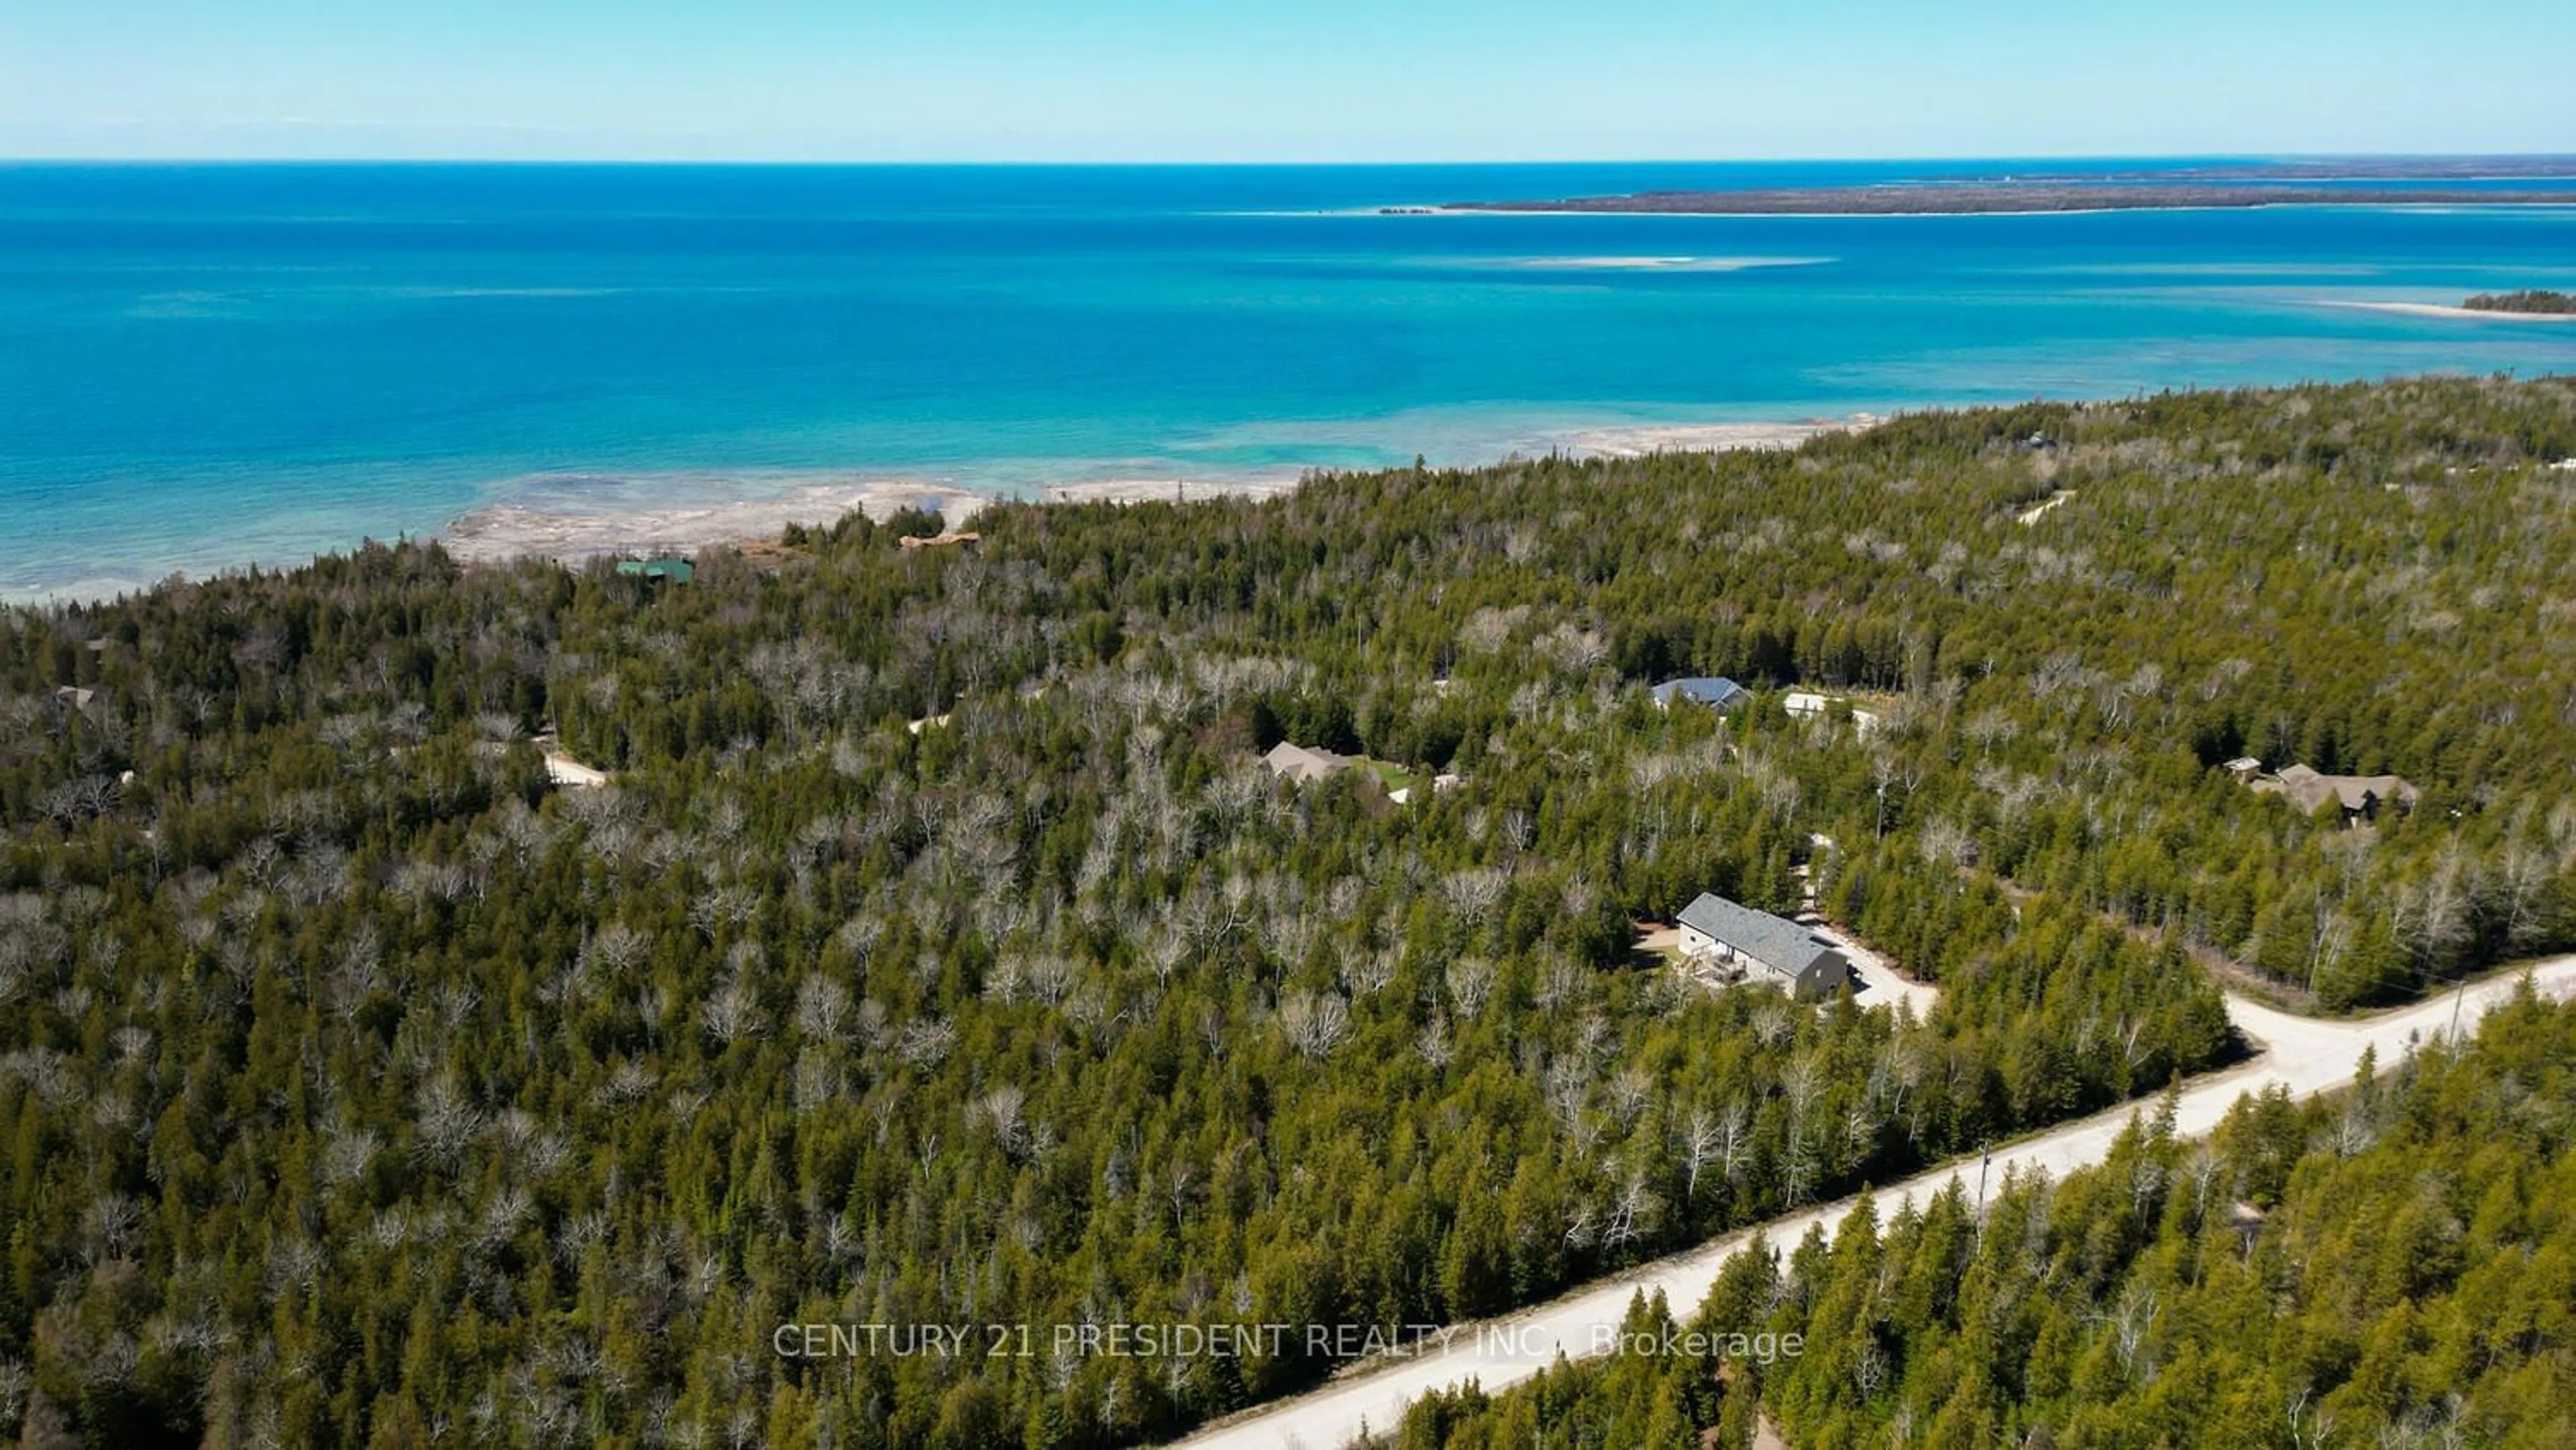 Lakeview for 114 Pike St, Northern Bruce Peninsula Ontario N0H 1W0